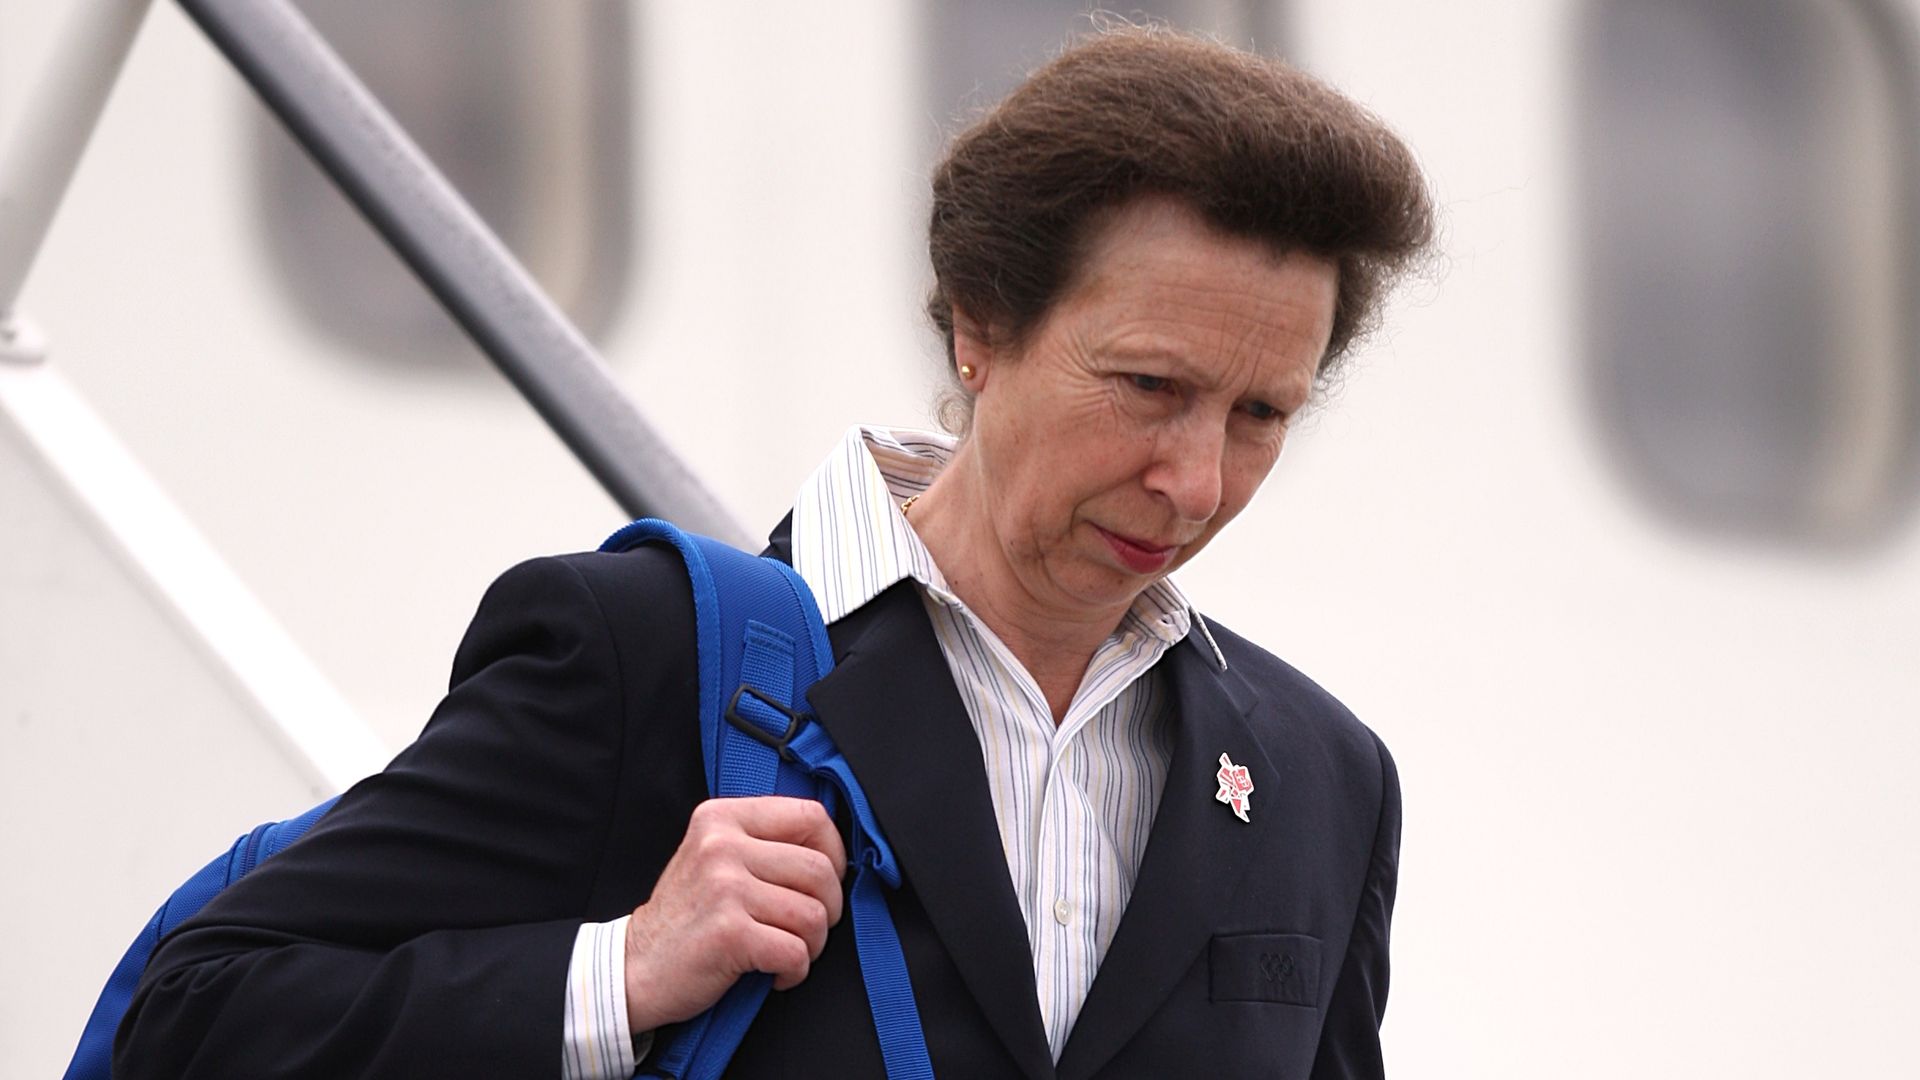 Princess Anne leaves the plane carrying the Great Britain Olympic team at Heathrow Airport after returning from the Olympic Games in Beijing, China.   